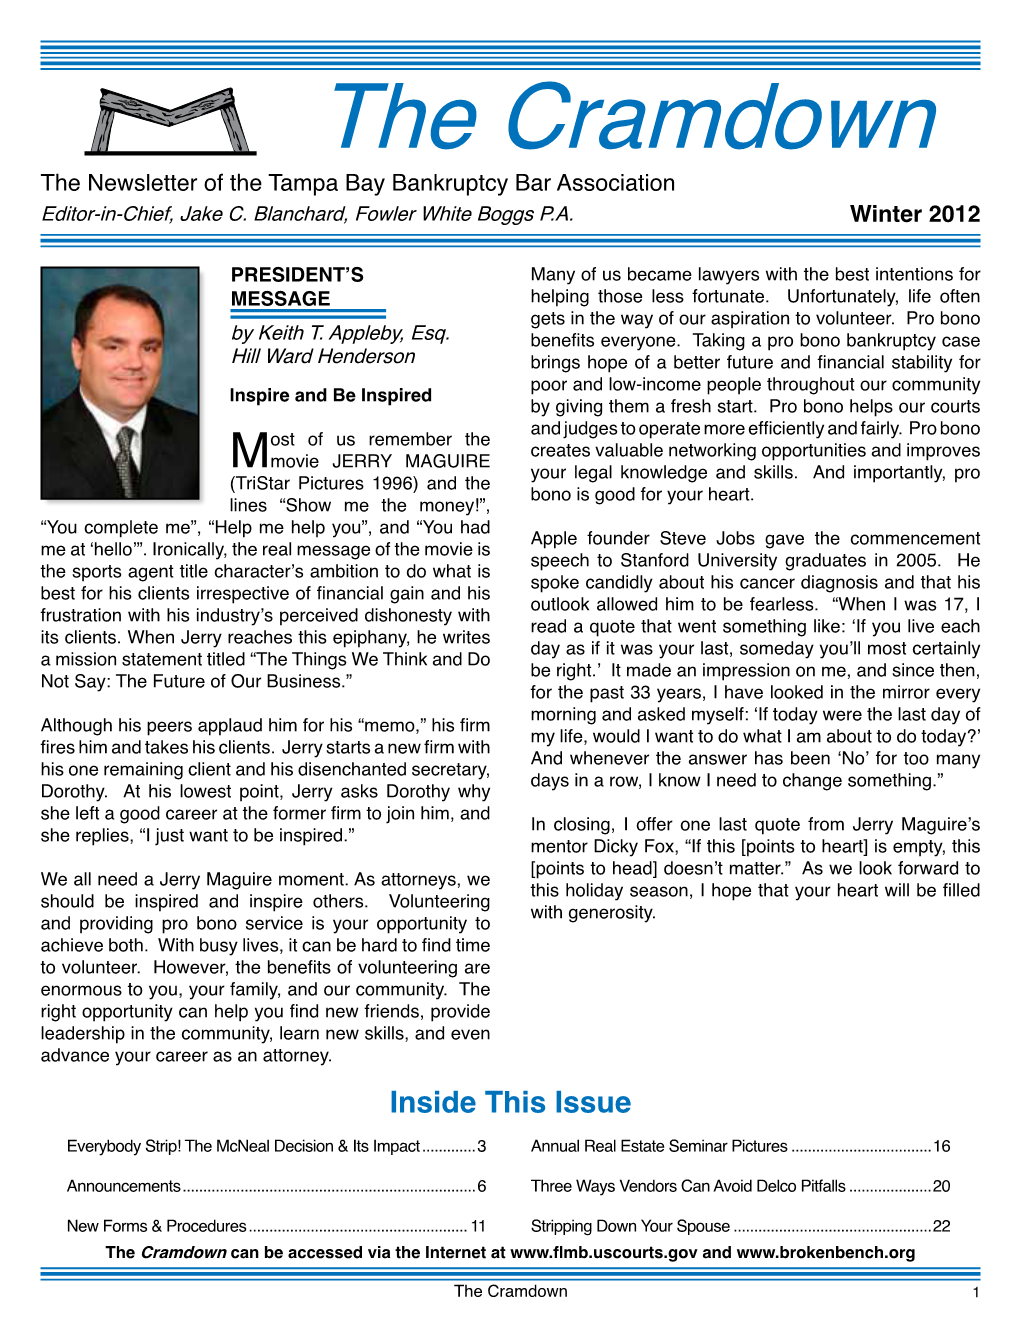 The Cramdown the Newsletter of the Tampa Bay Bankruptcy Bar Association Editor-In-Chief, Jake C